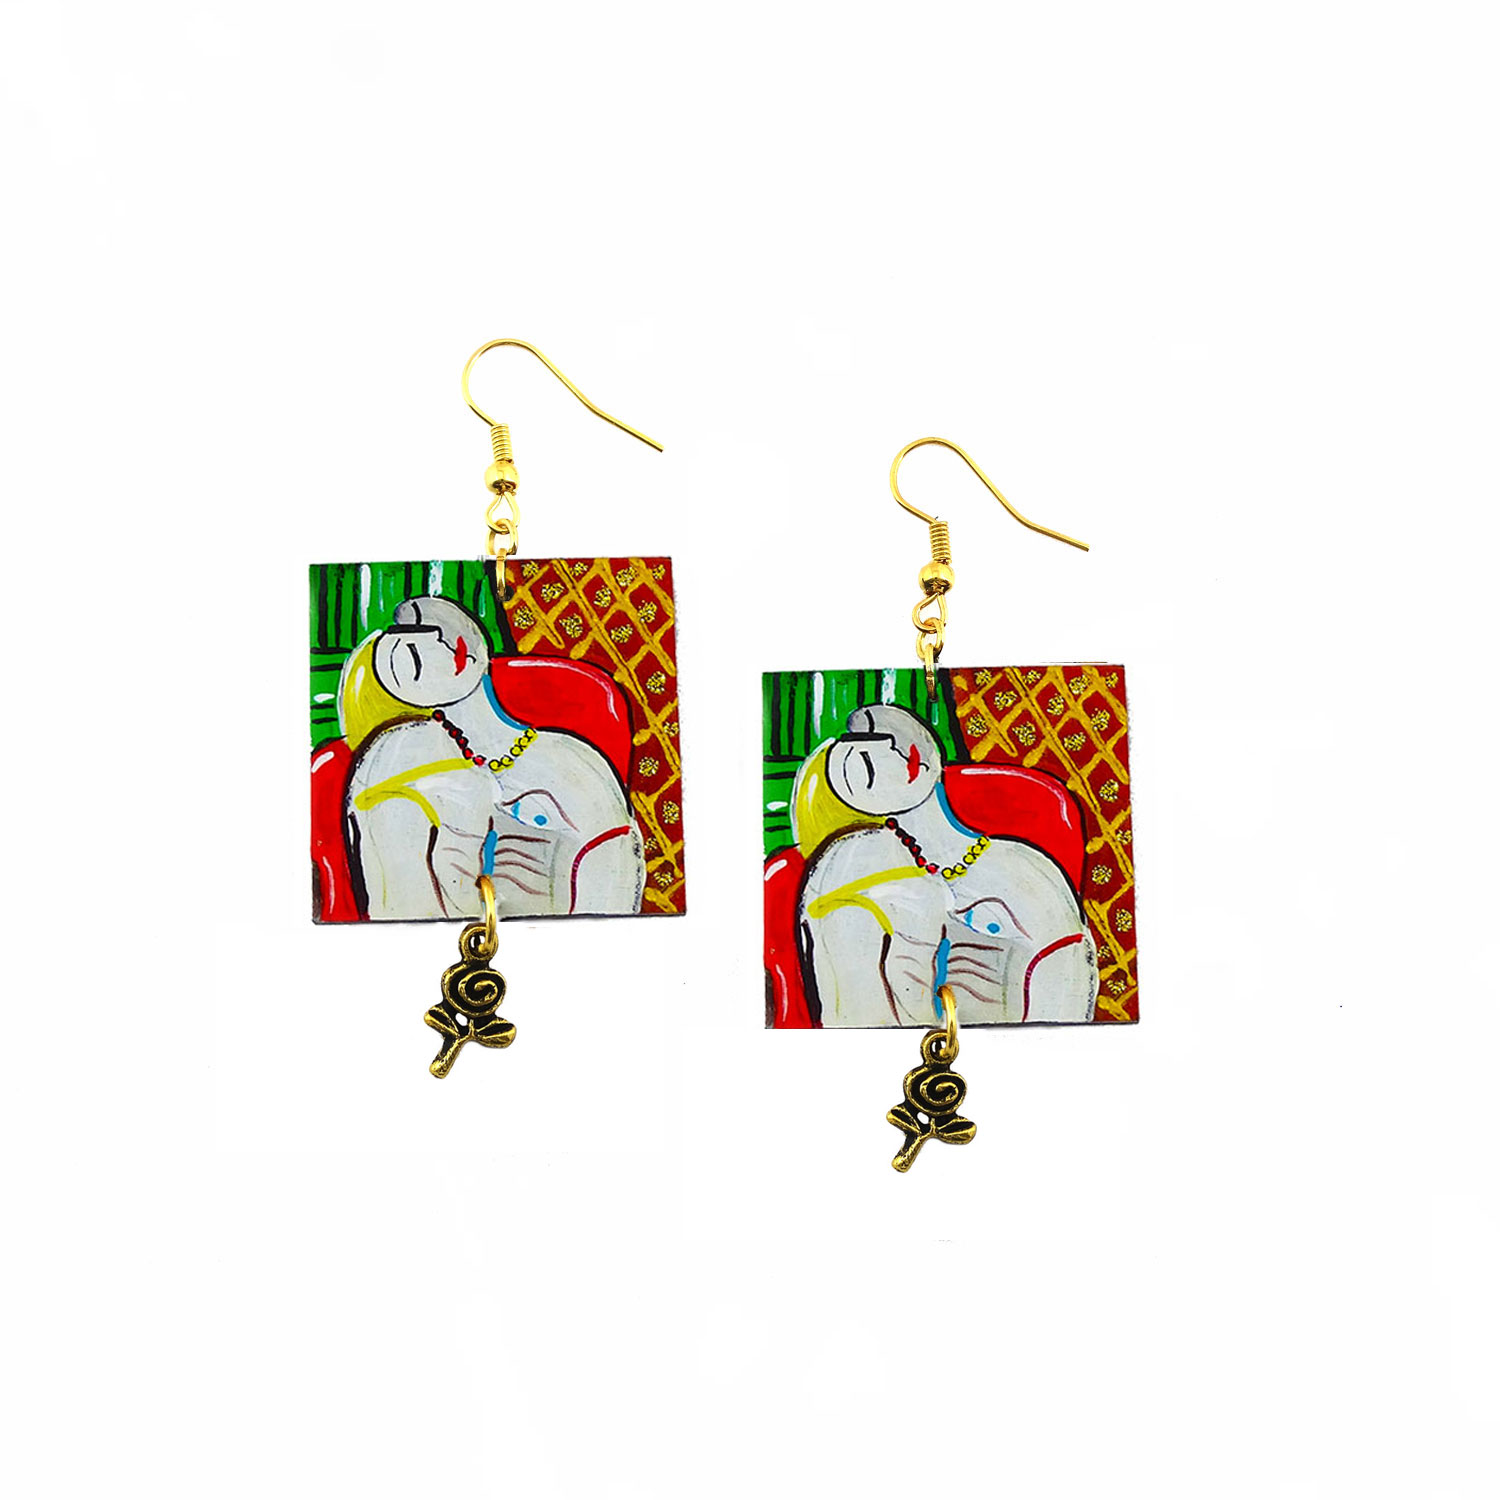 Hand-painted Earrings - The dream by Picasso